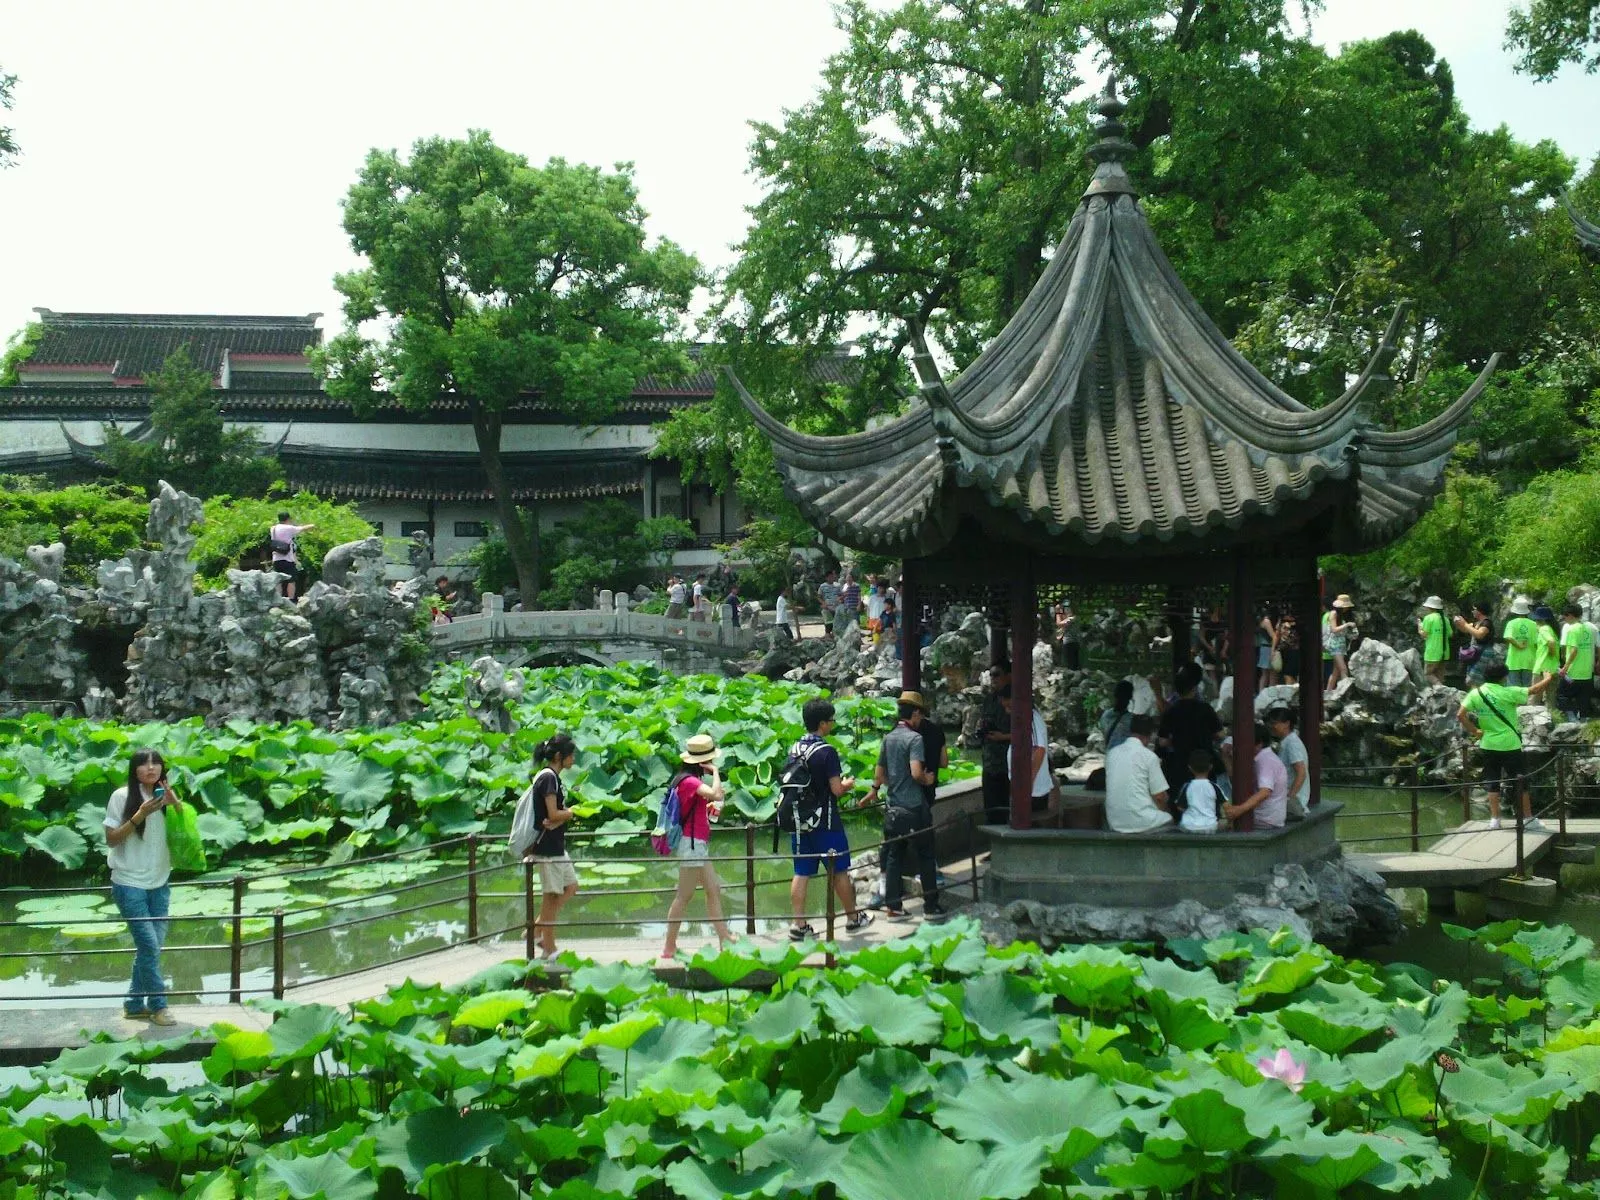 Lingering Garden in China, East Asia | Gardens - Rated 3.5